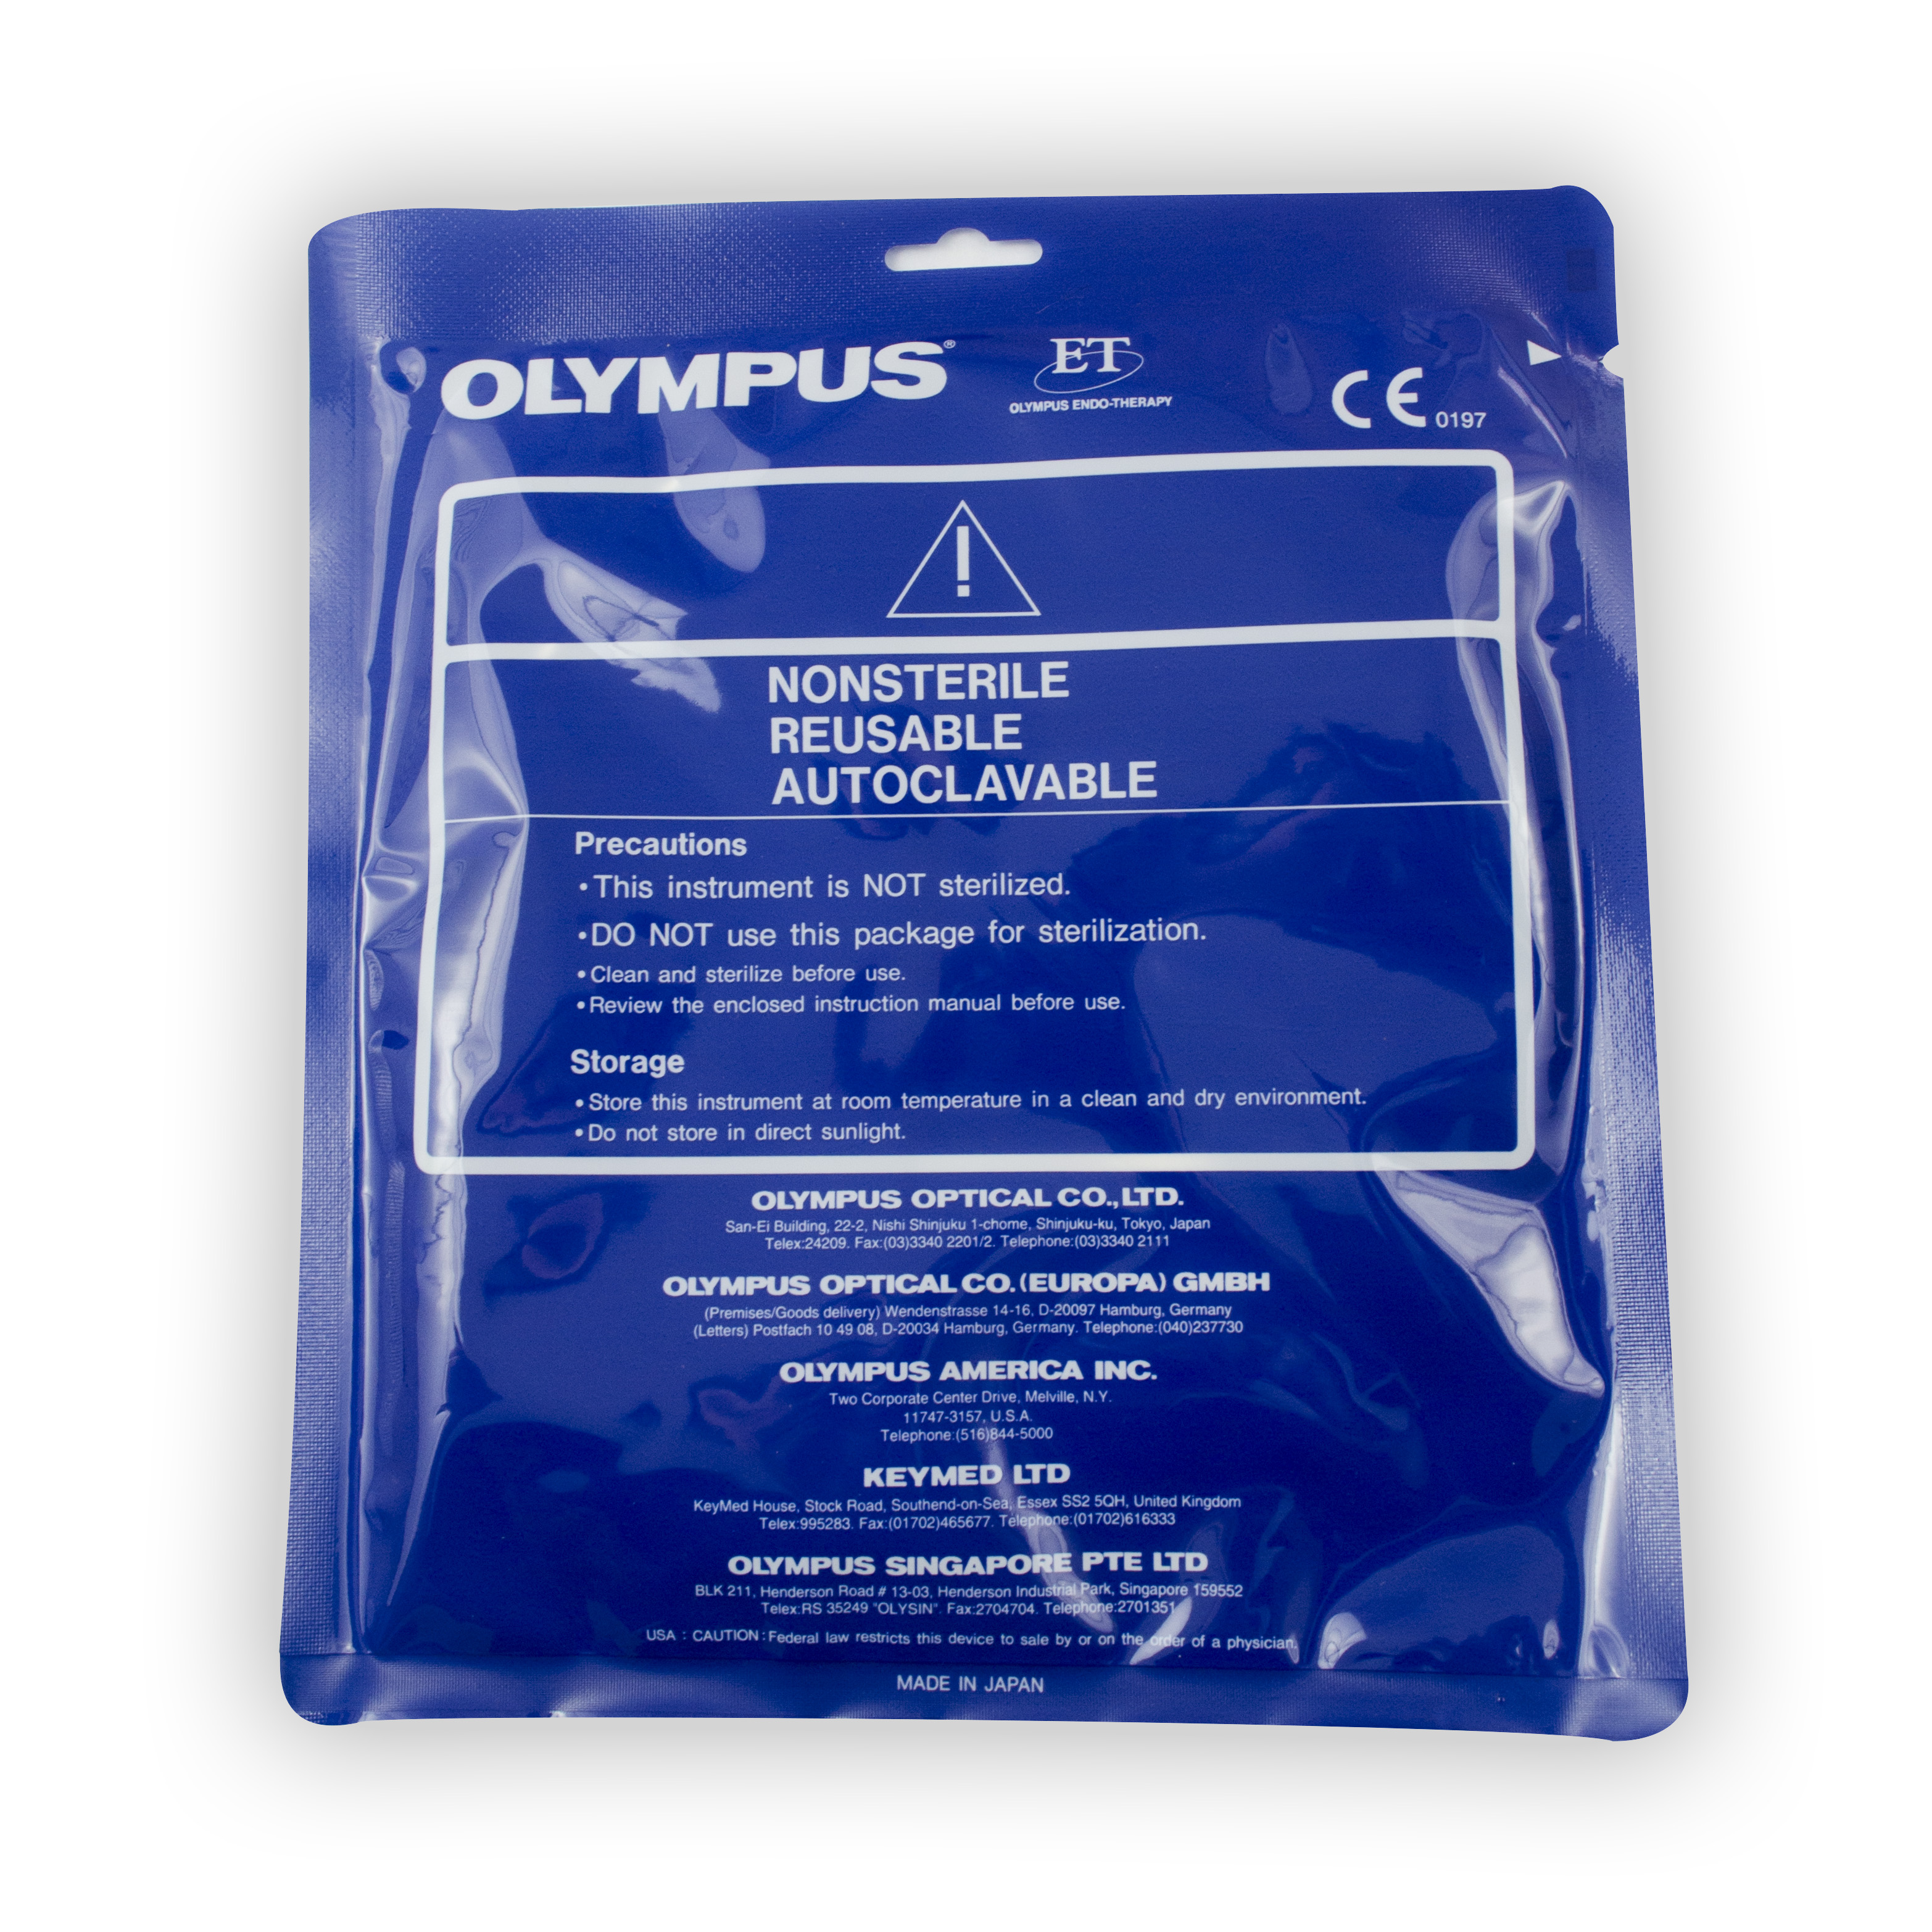 Olympus Reusable Sphincterotome - KD-6Q-1 (Pack of 2)